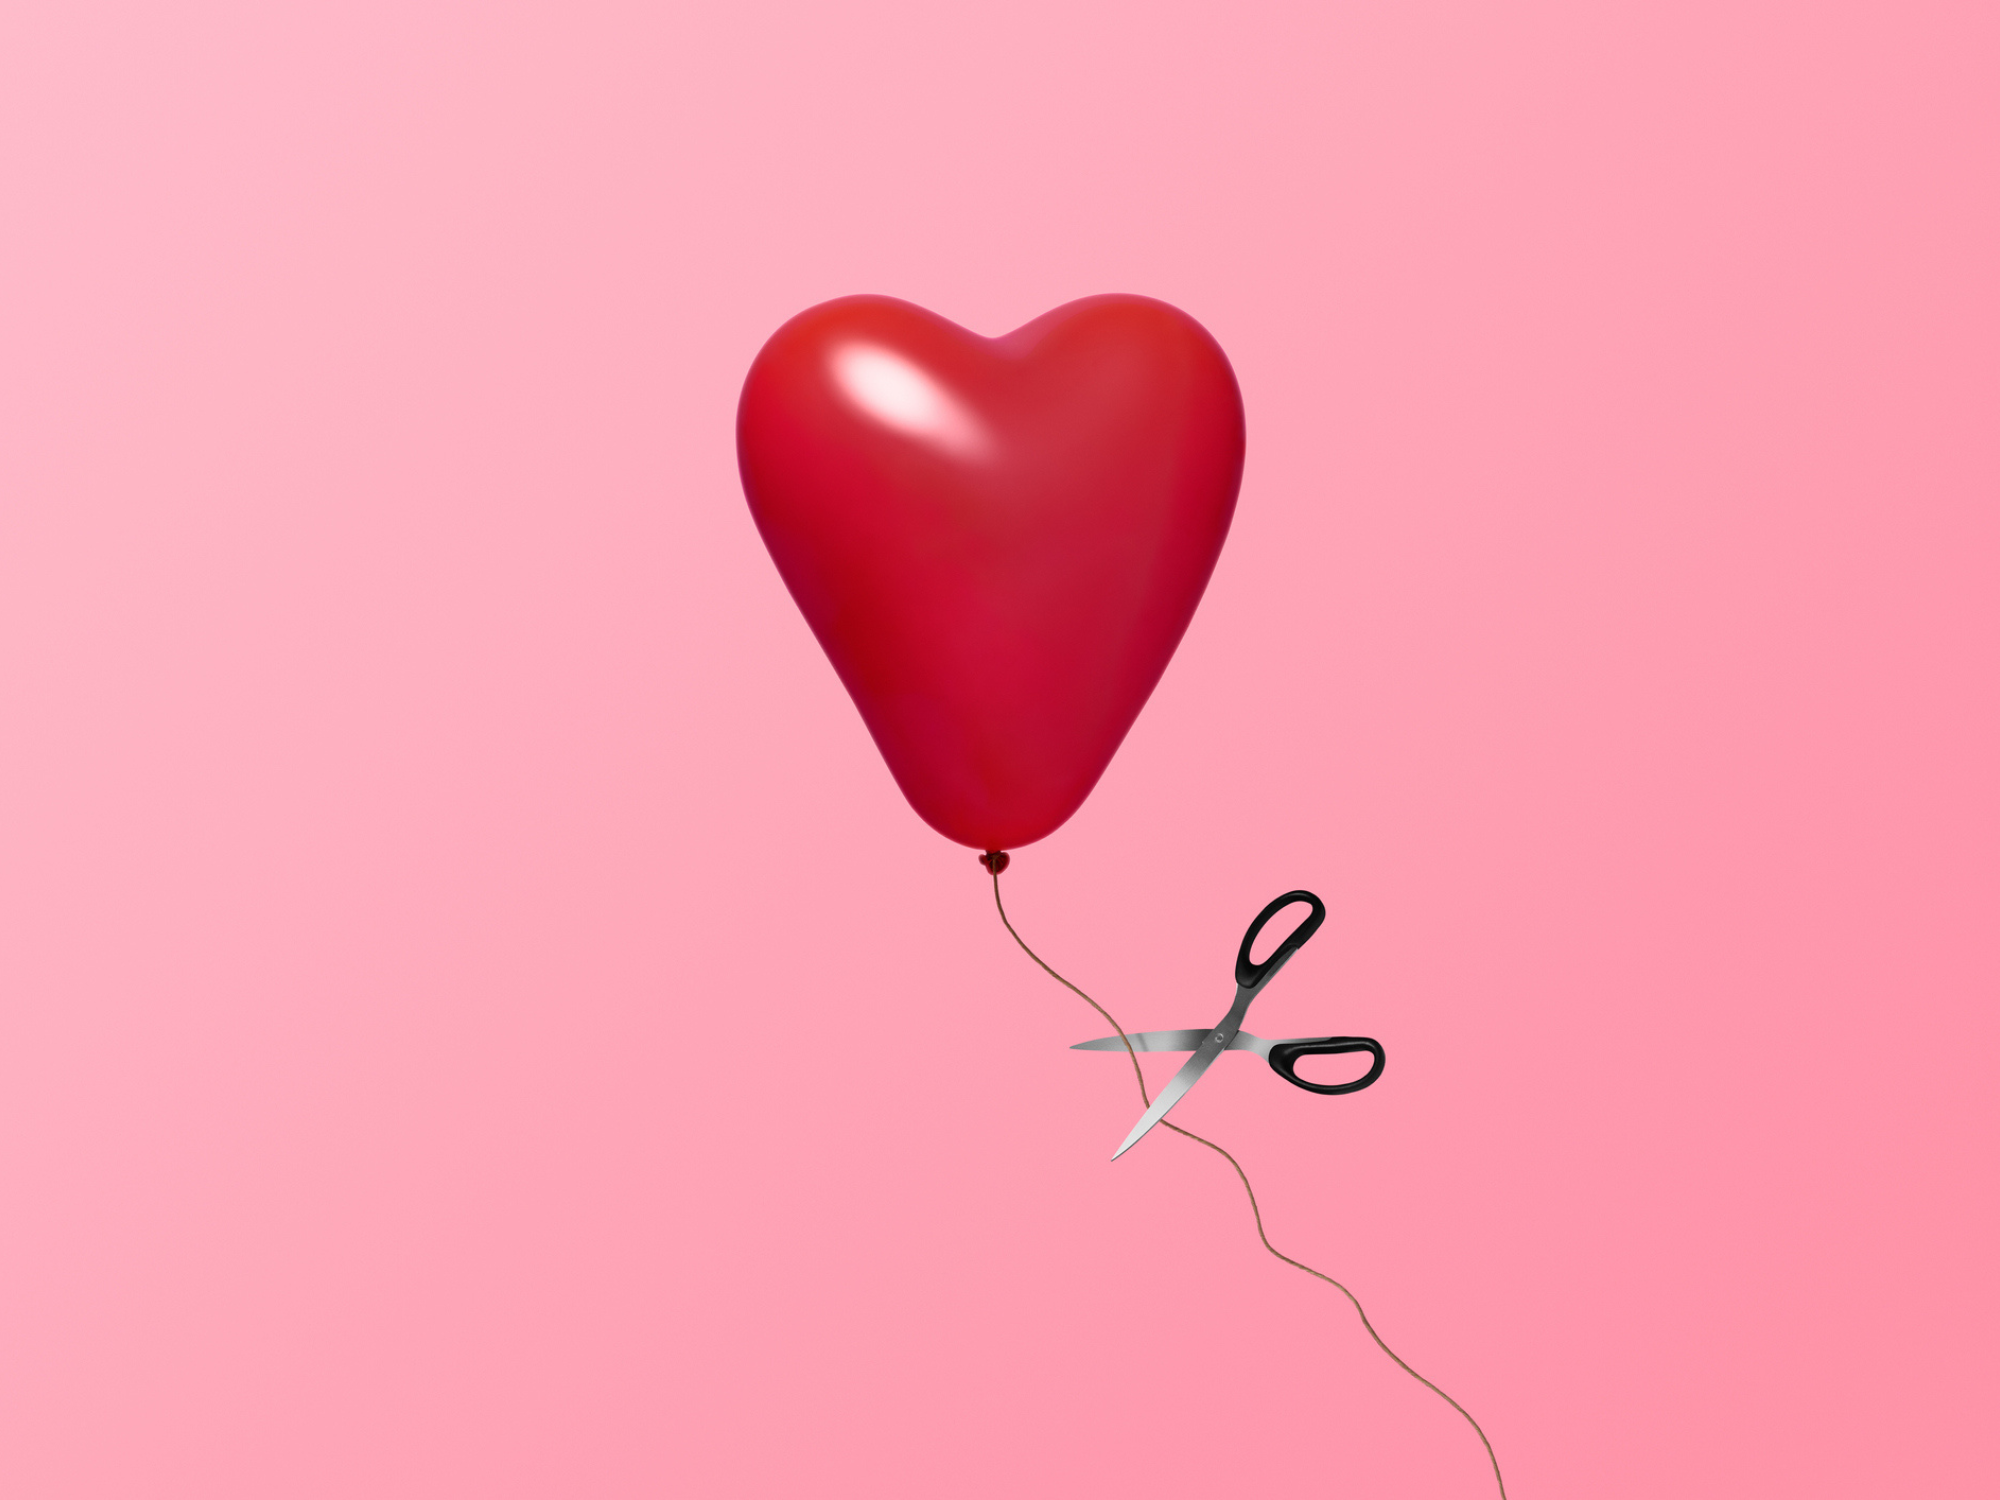 Heart balloon being cut with scissors